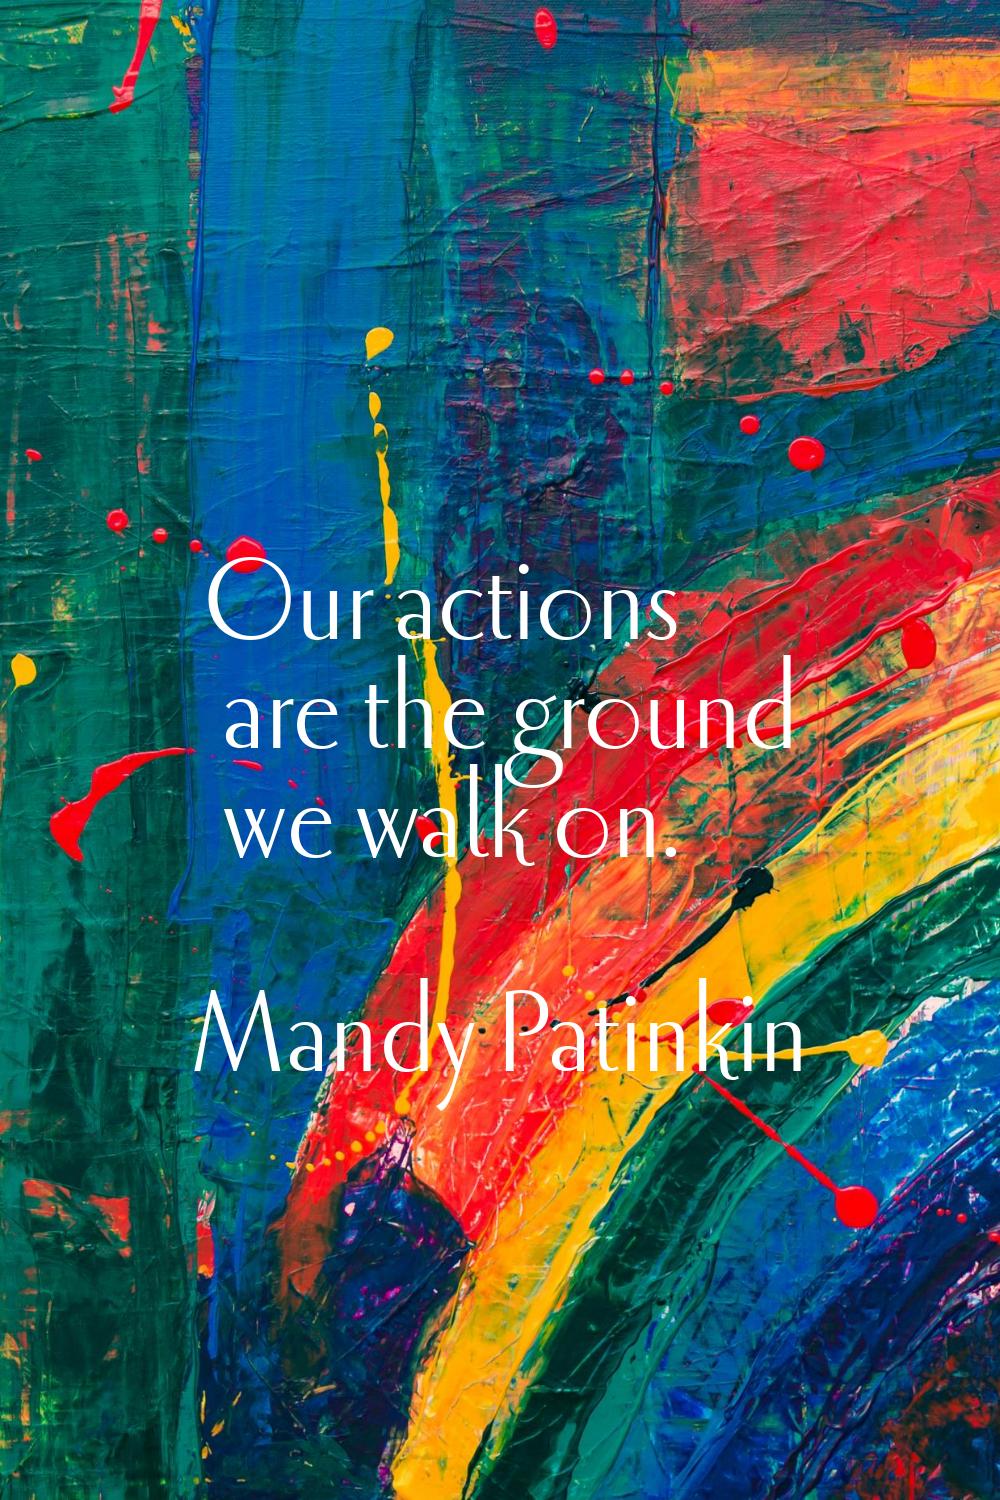 Our actions are the ground we walk on.